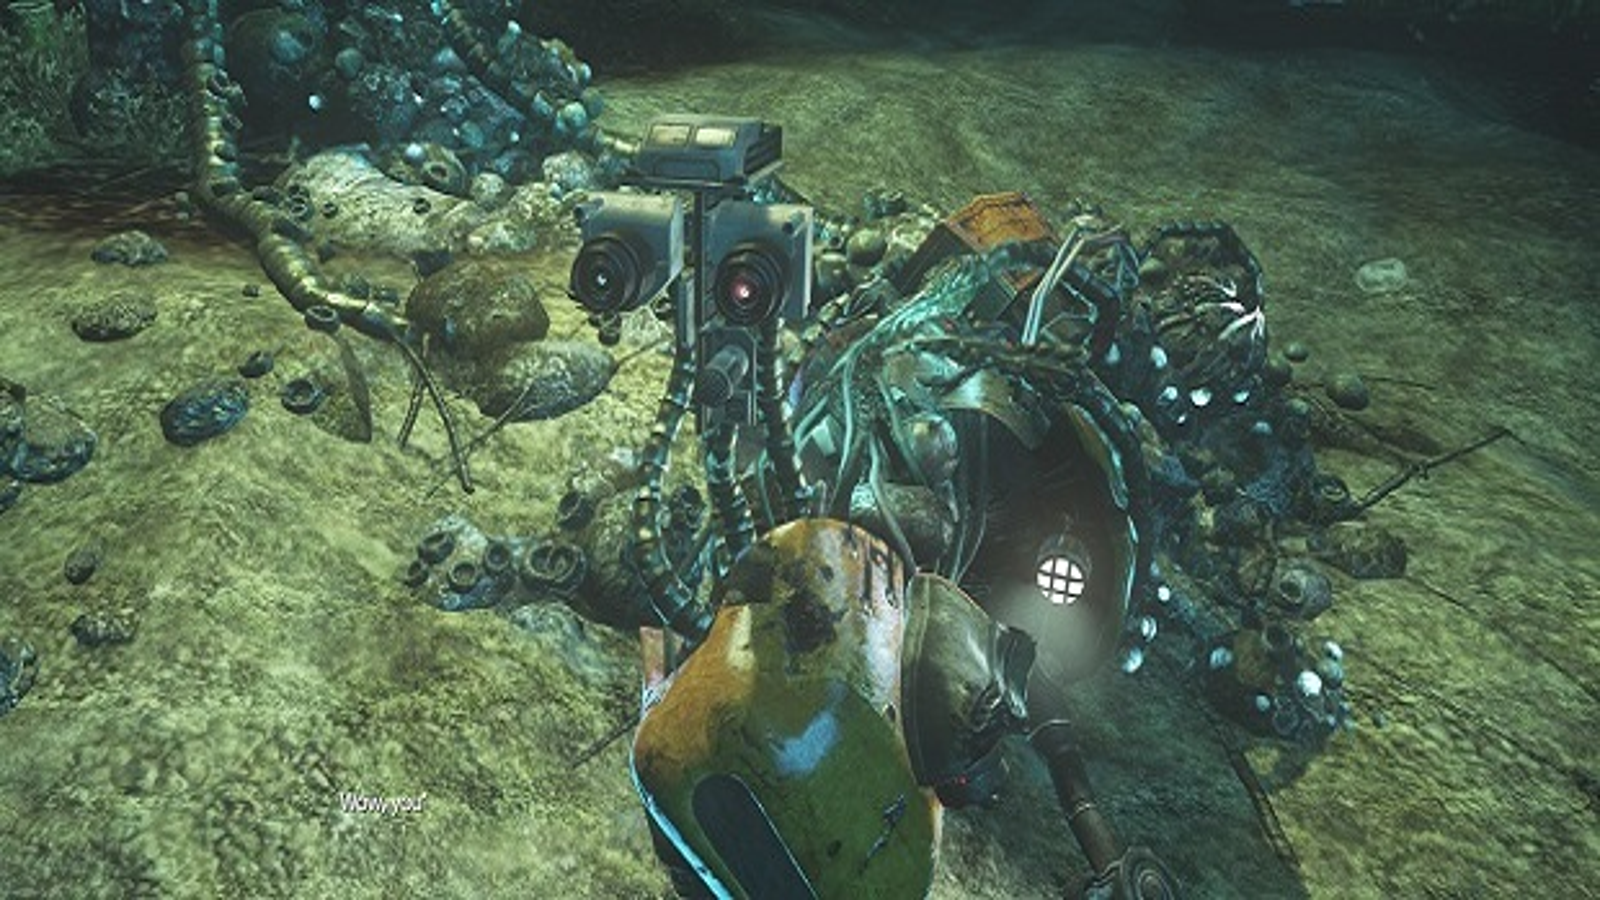 SOMA review: Ghostly machines beneath the sea, exploring